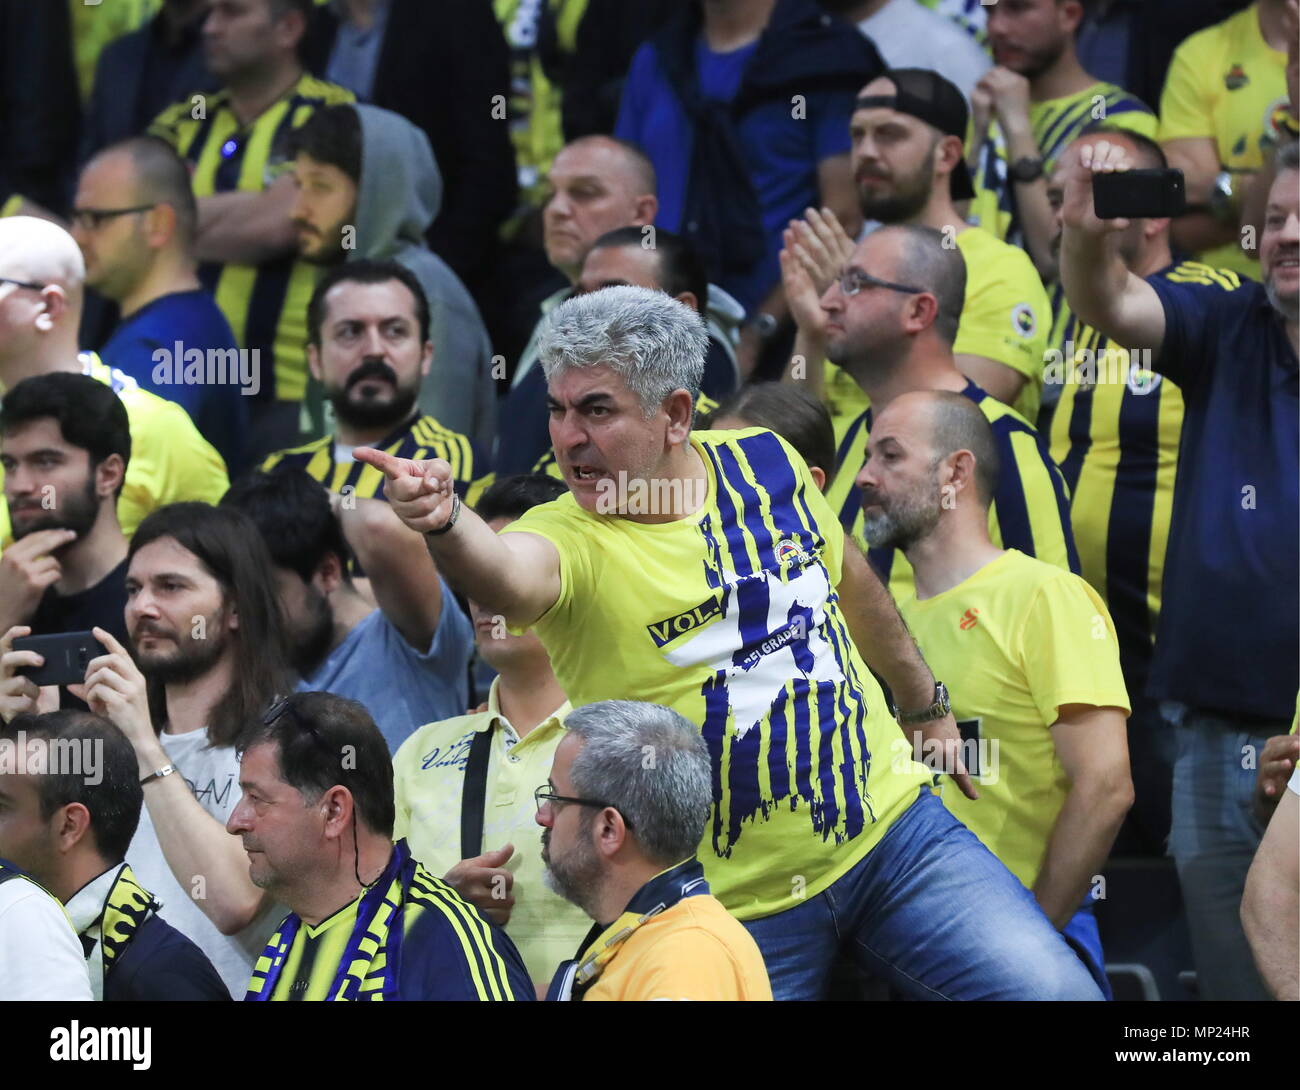 Belgrade, Serbia. 20th May, 2018. BELGRADE, SERBIA - MAY 20, 2018: BC  Fenerbahce Dogus Istanbul's fans react after the 2017/18 Season Basketball  Euroleague Final Four championship match against BC Real Madrid at